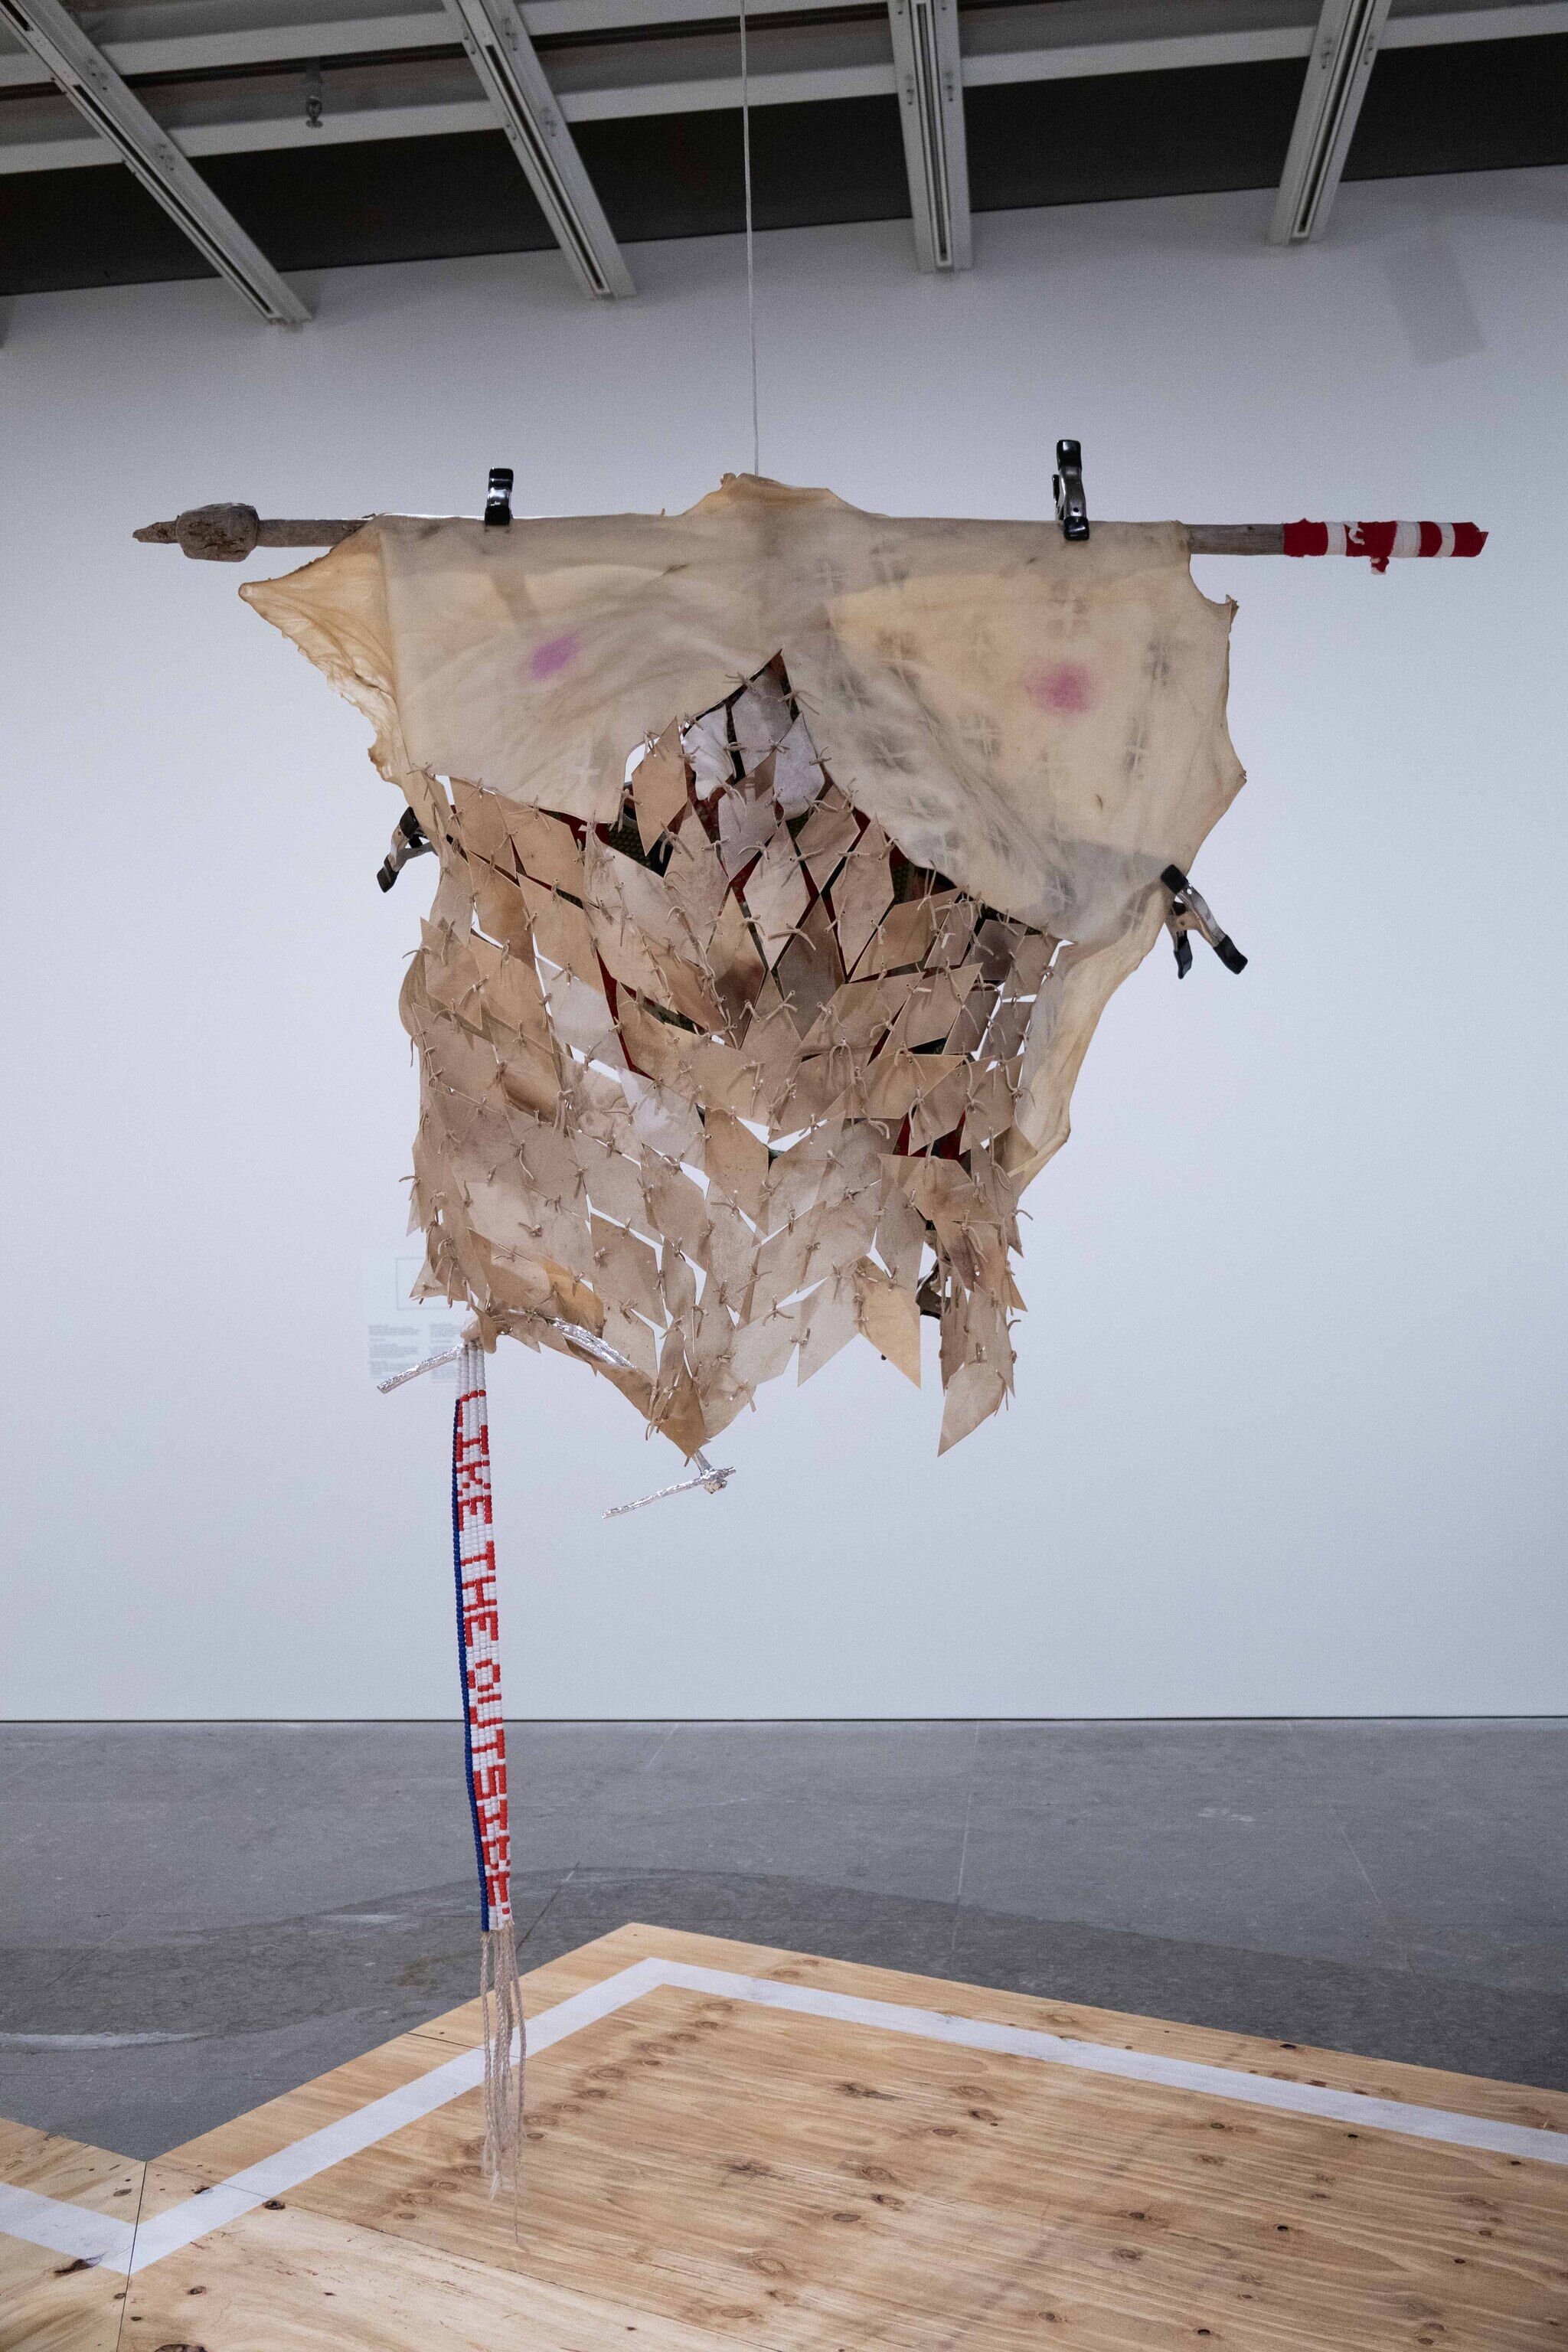 This work consist of elk rawhide, cotton, newspaper, wood, leather, plastic beads, willow branches, artificial hair, aluminum foil, chalk, metal clamps, rope, makeup, and graphite suspended in the air above a wooden slab.